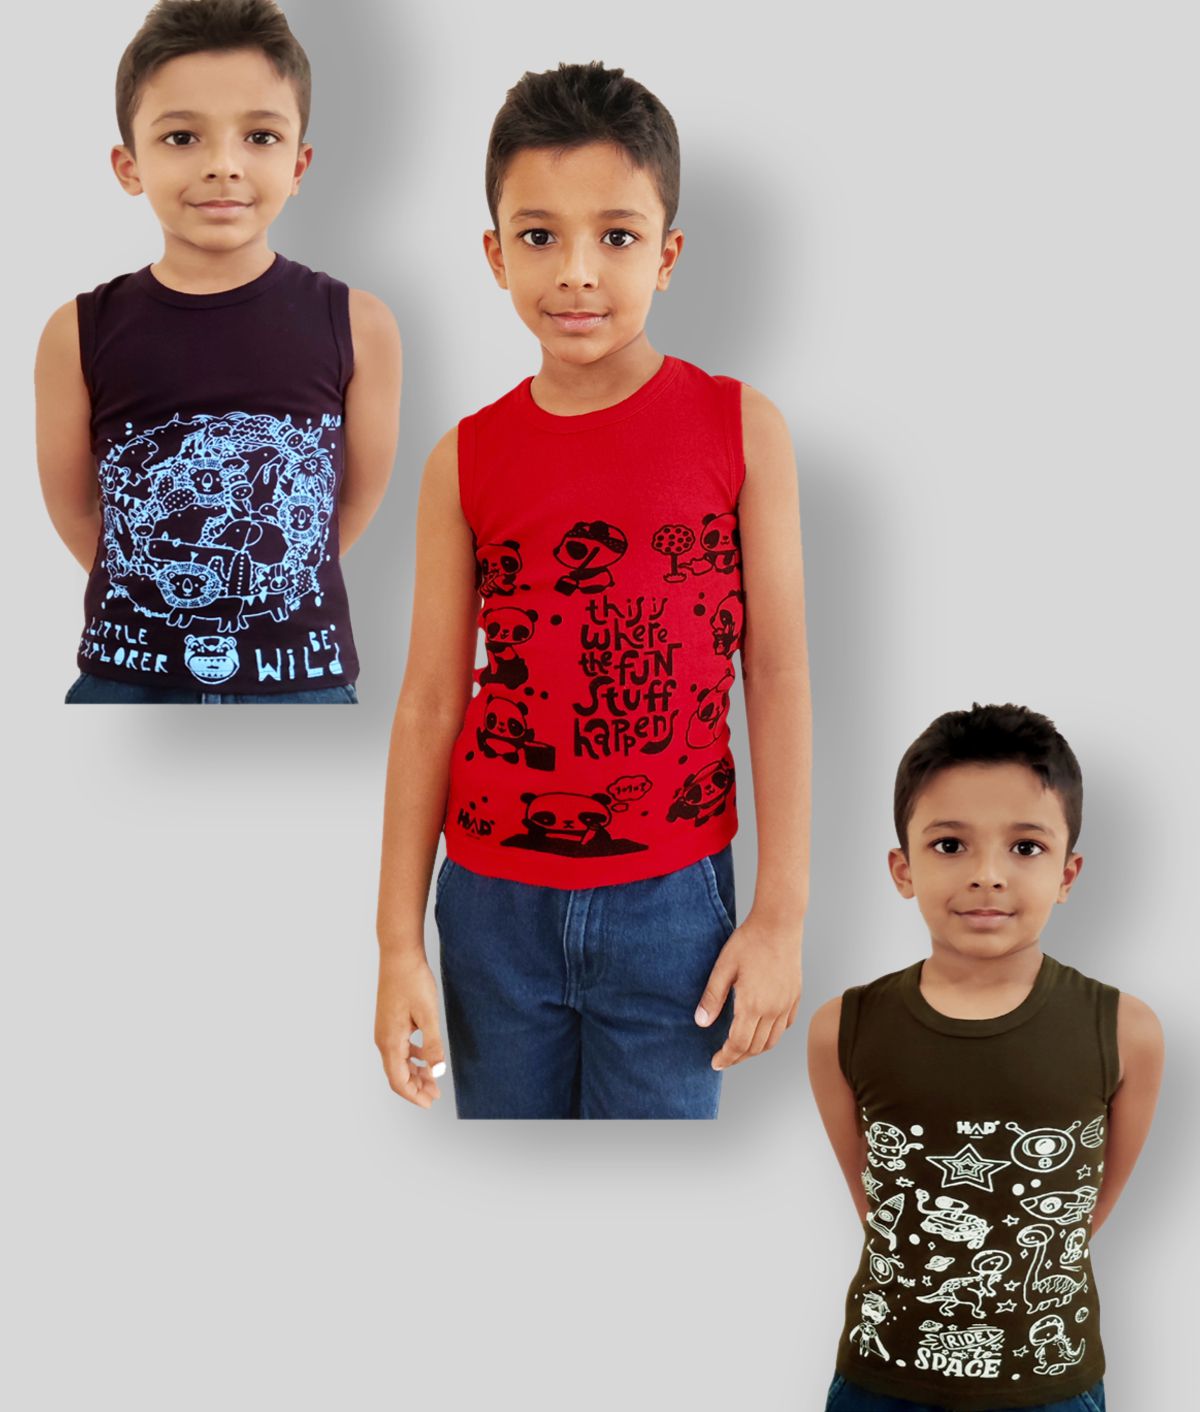     			HAP Boys Multicolor Printed Vest | Tank top |Sleeveless Tshirt - Pack of 3  /Any Colour